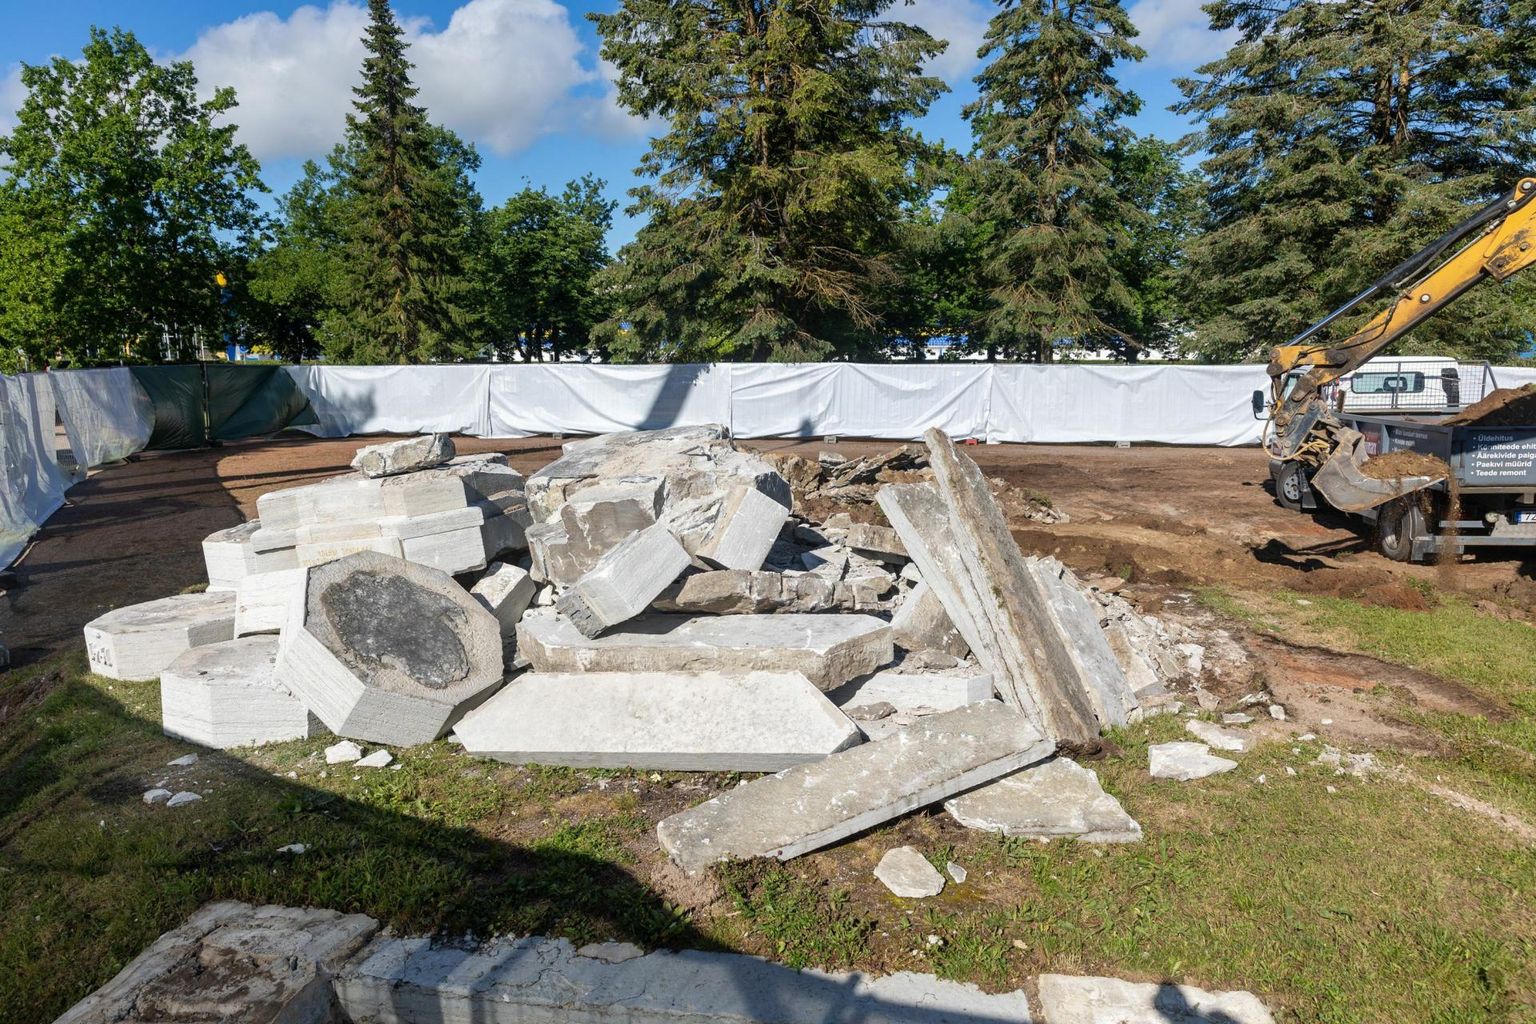 Pieces of the demolished red monument in Rakvere will be displayed as exhibits in the war museum.